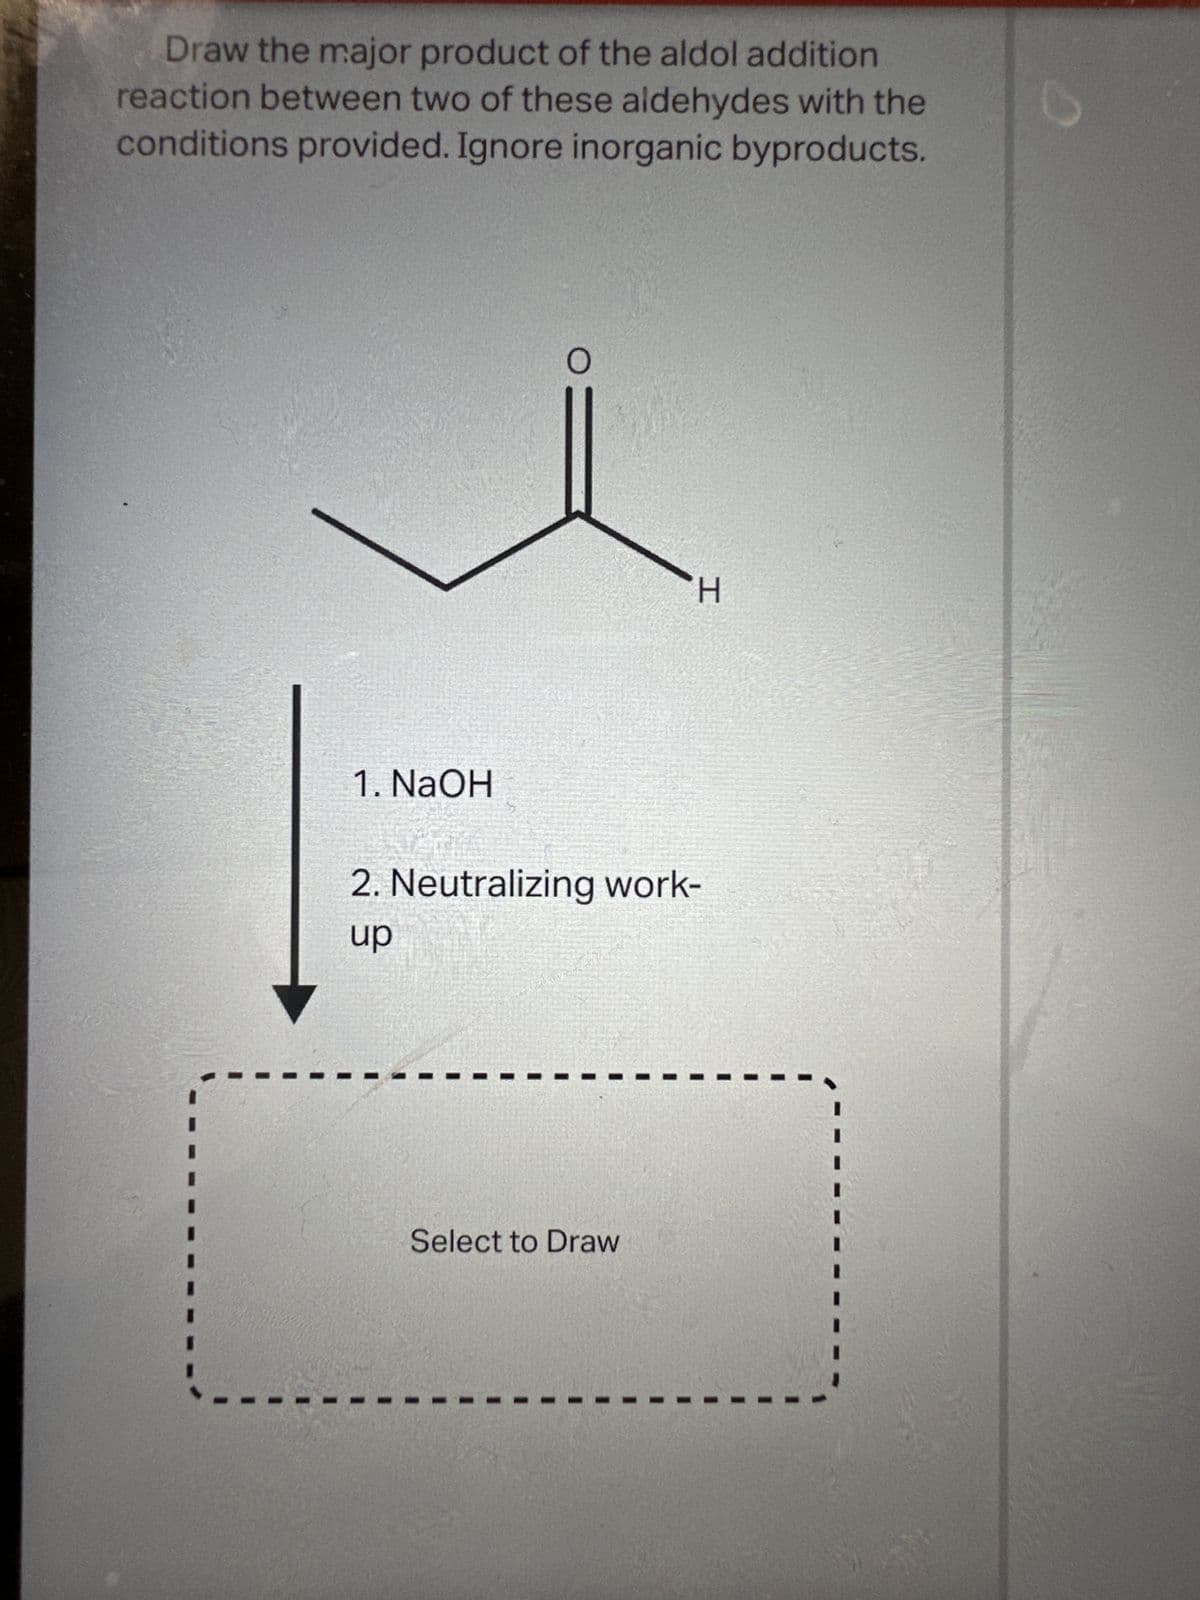 Draw the major product of the aldol addition
reaction between two of these aldehydes with the
conditions provided. Ignore inorganic byproducts.
1. NaOH
O
H
2. Neutralizing work-
up
Select to Draw